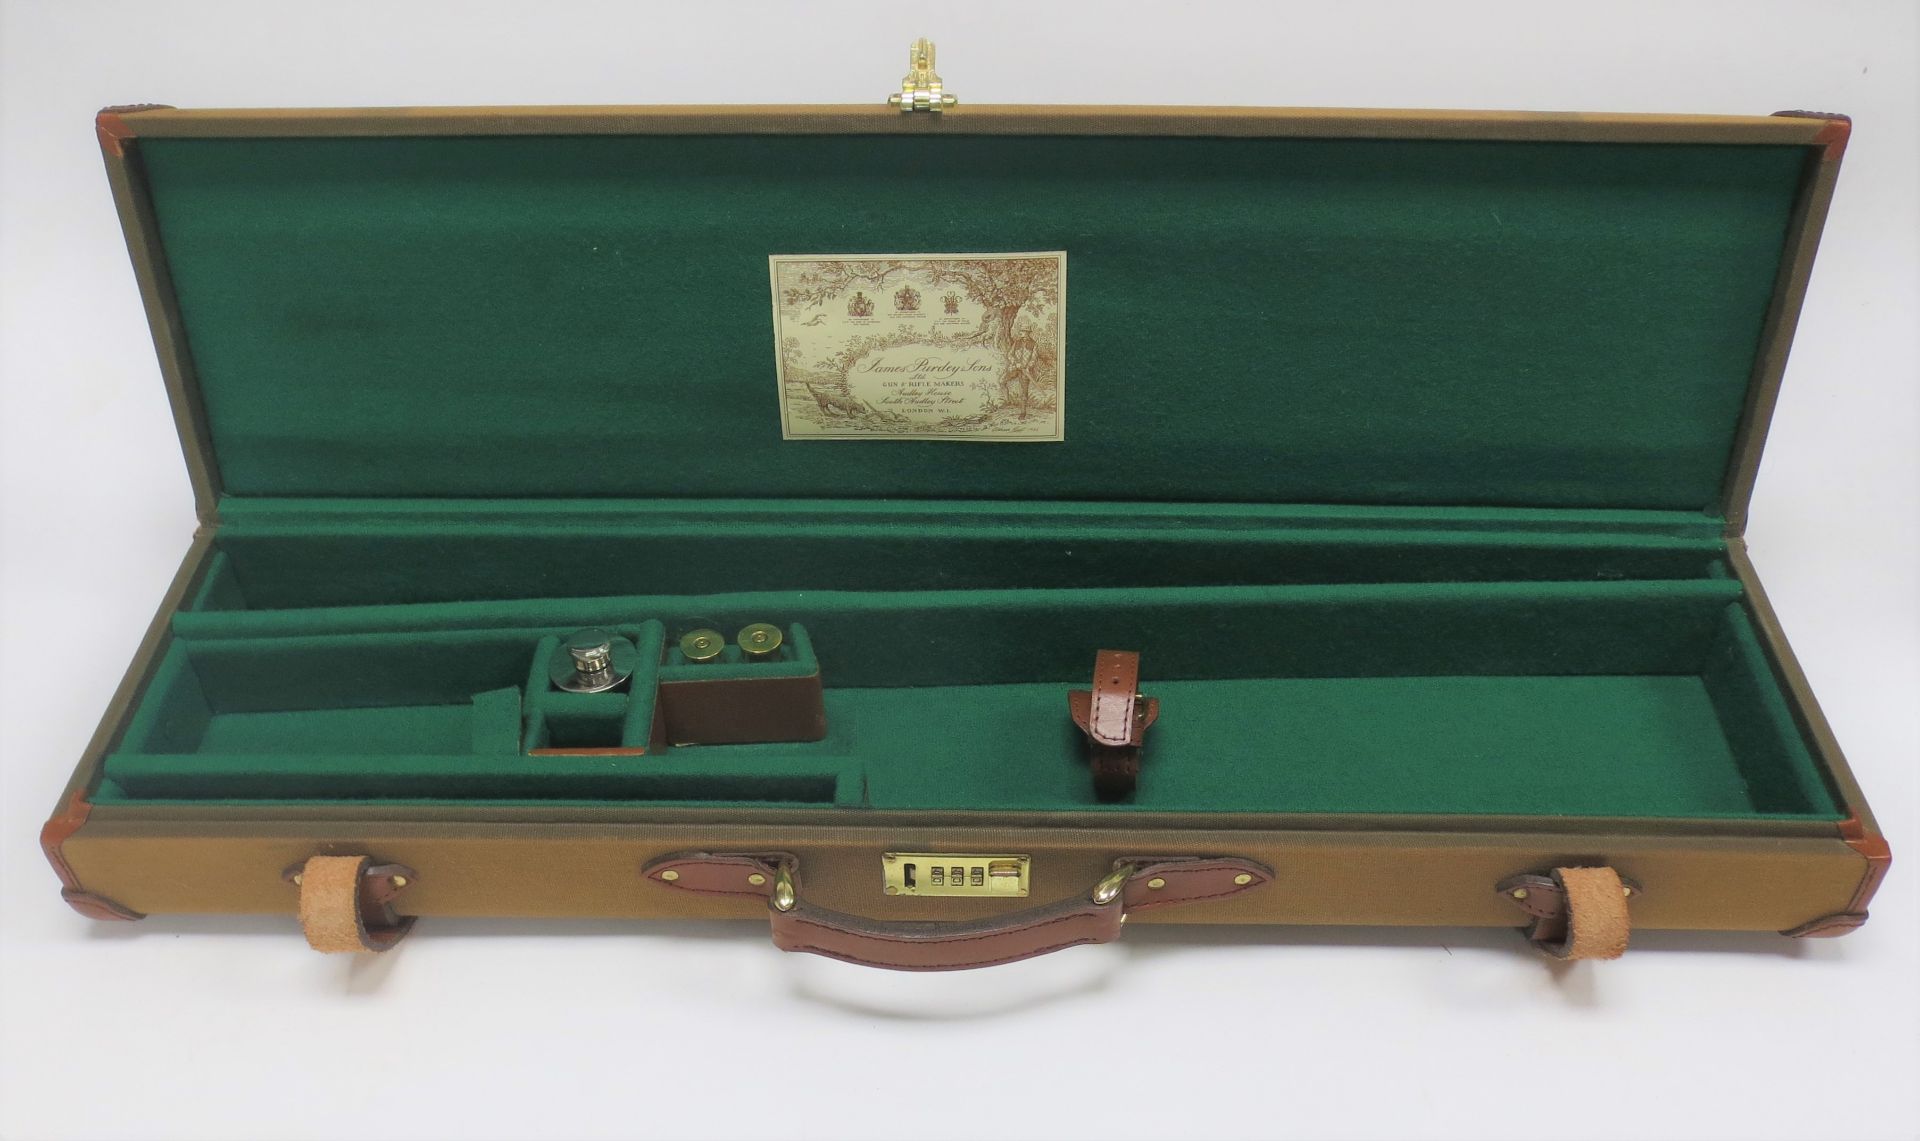 A canvas single guncase With James Purdey reproduction trade-label